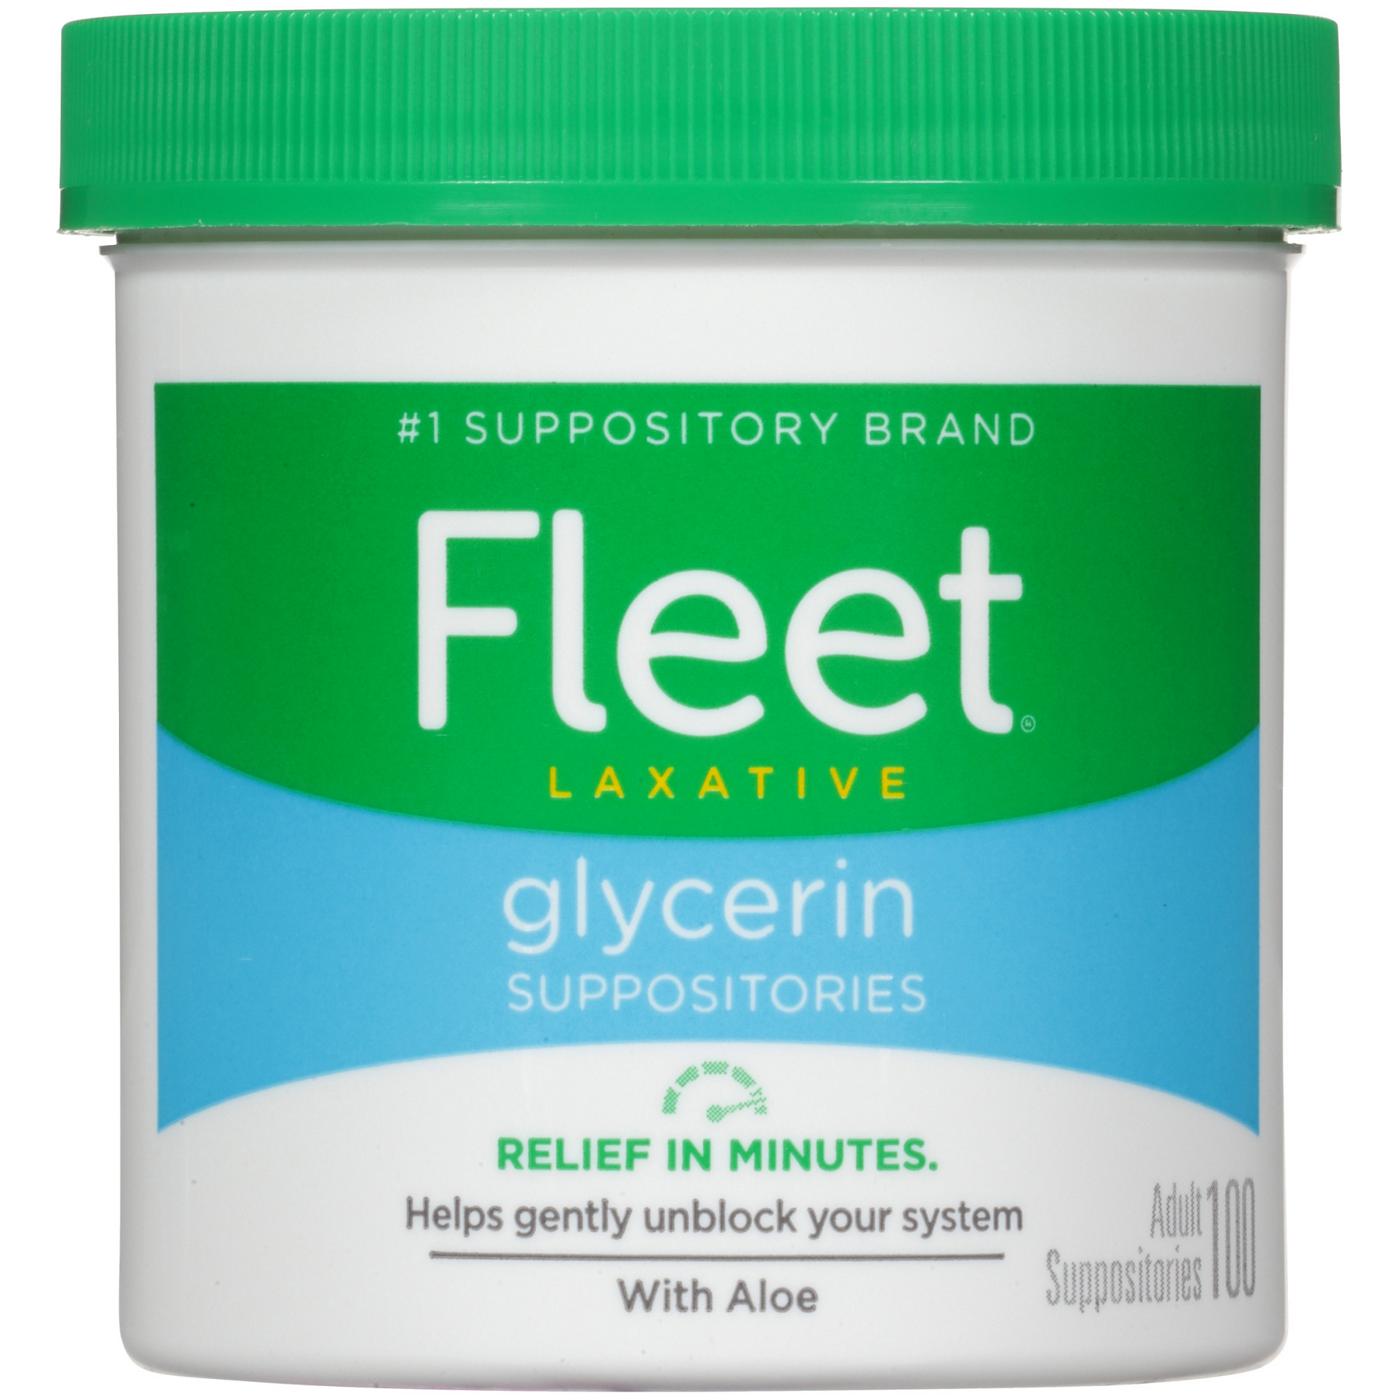 Fleet Laxative Glycerin Suppositories; image 1 of 5